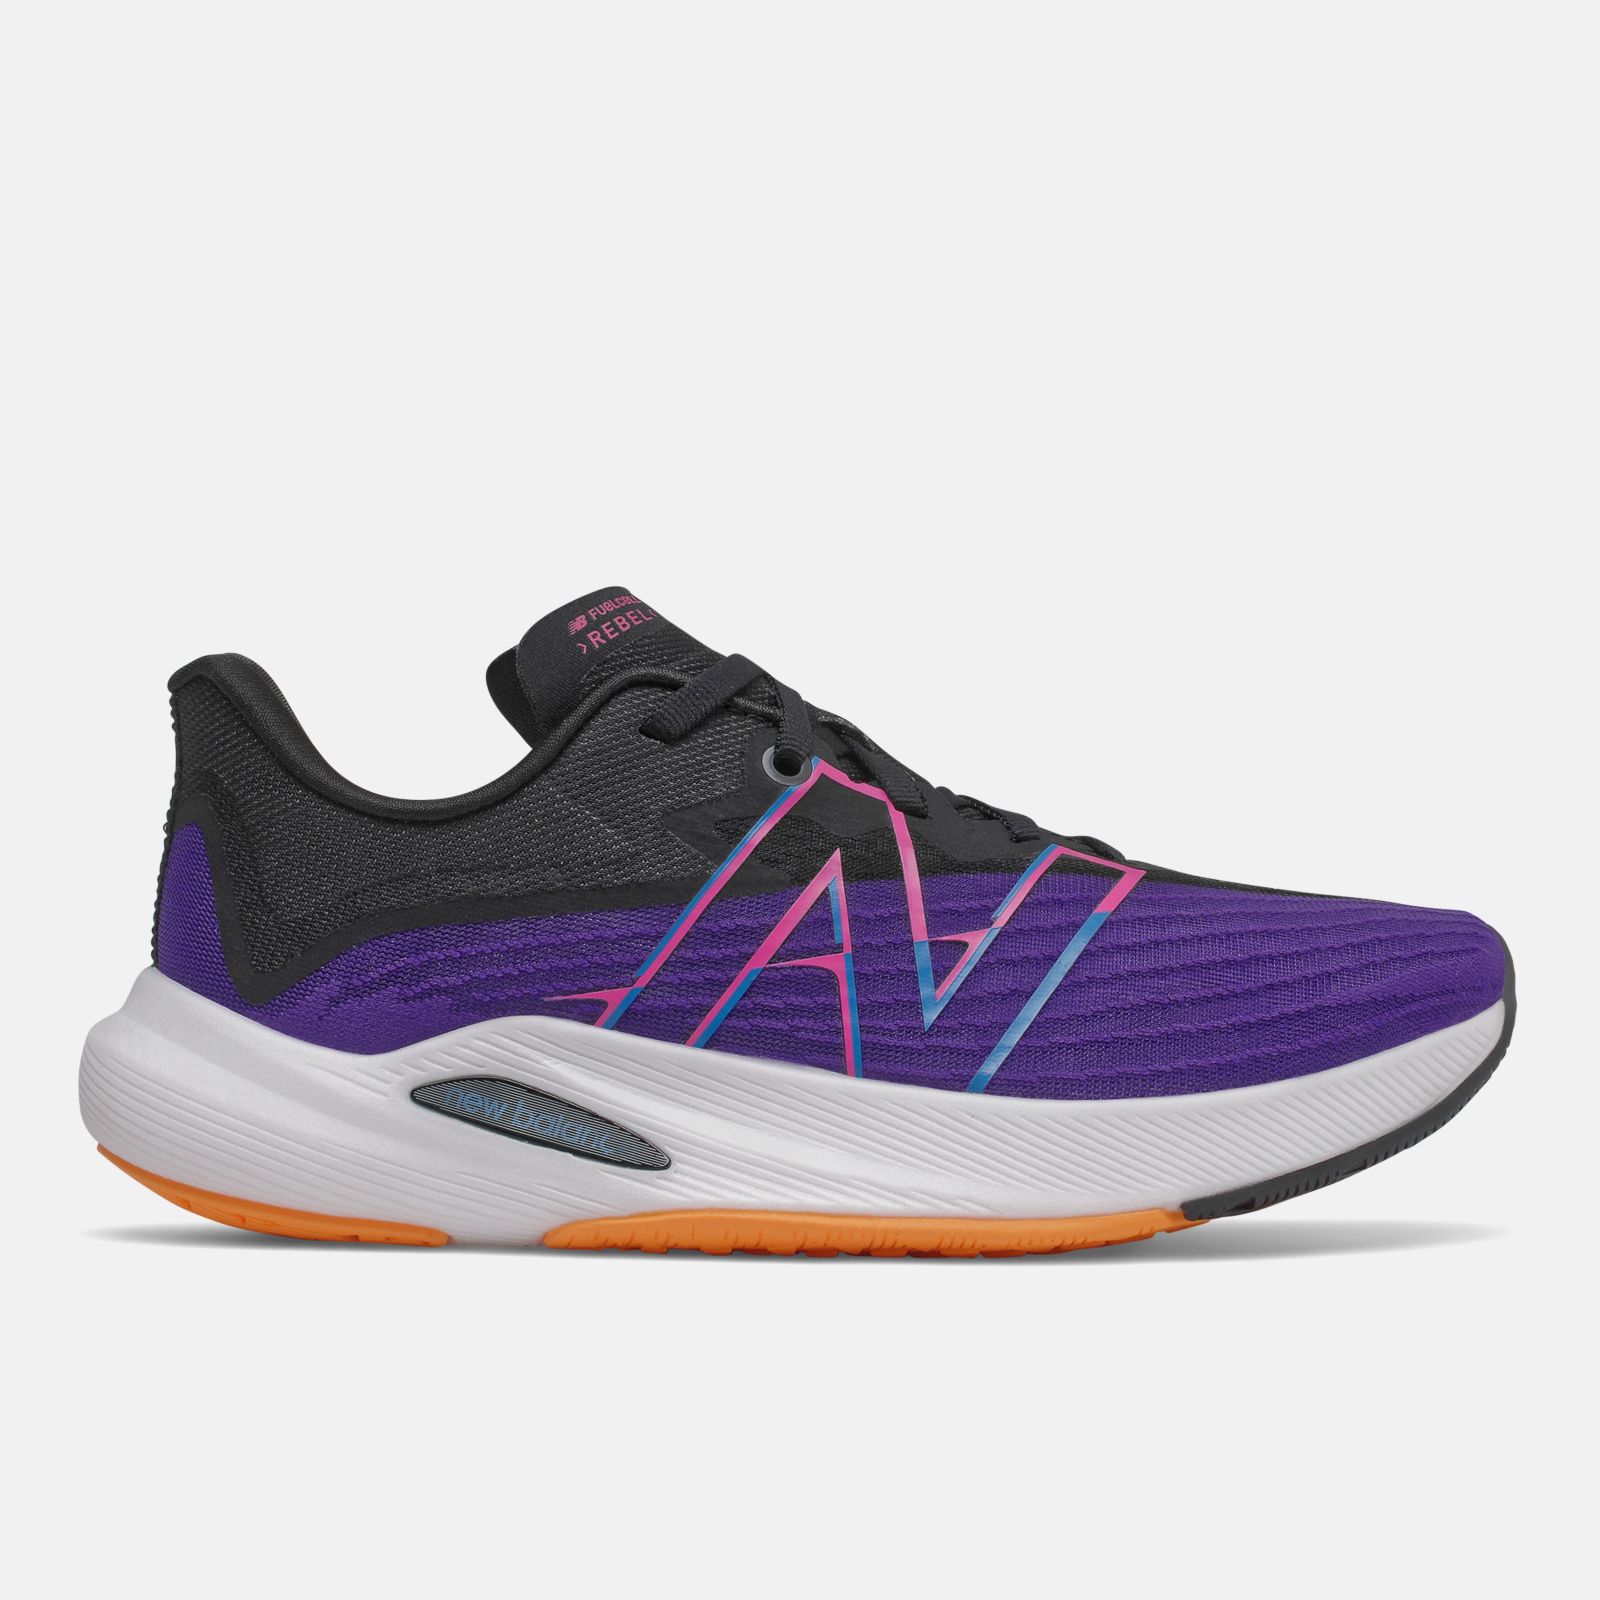 New Balance FuelCell Rebel v2, Black/Purple, swatch